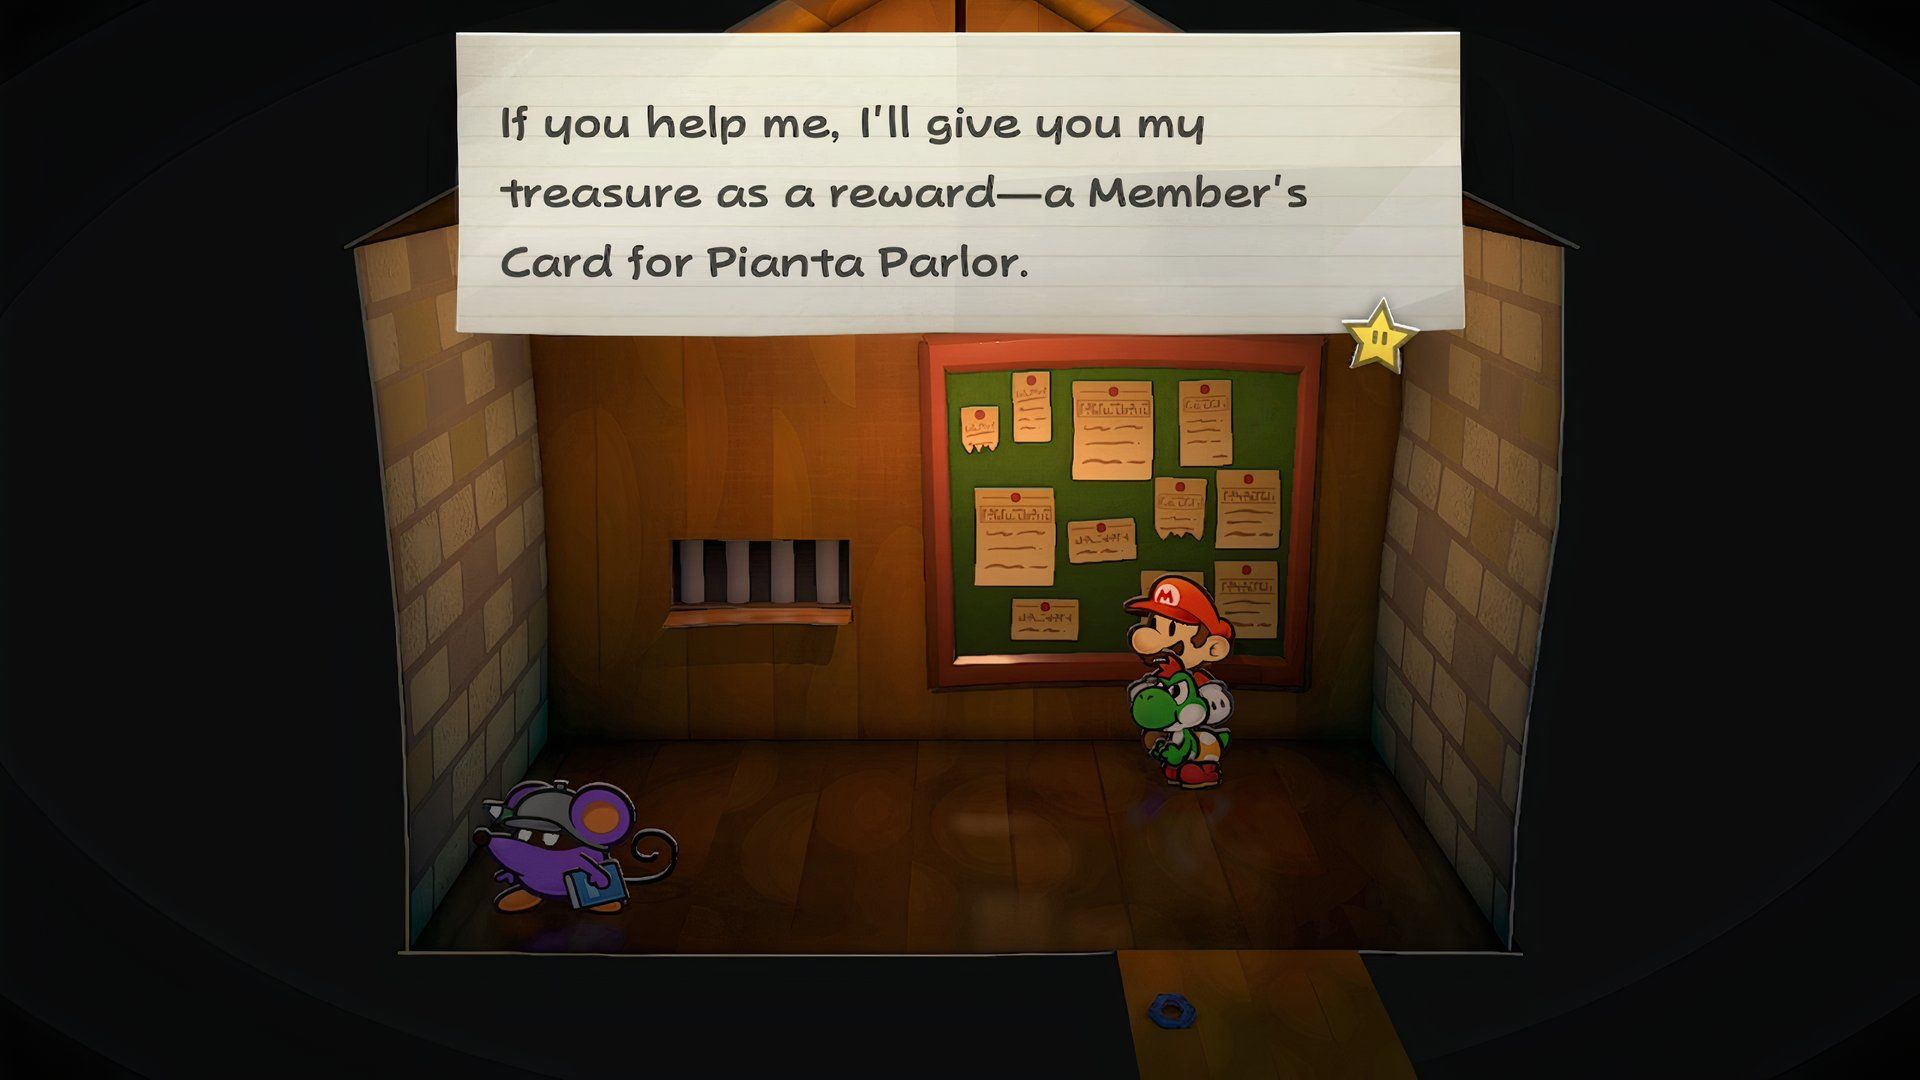 Paper Mario: The Thousand-Year Door - Trouble Center Pit of 100 Trials Member's Card